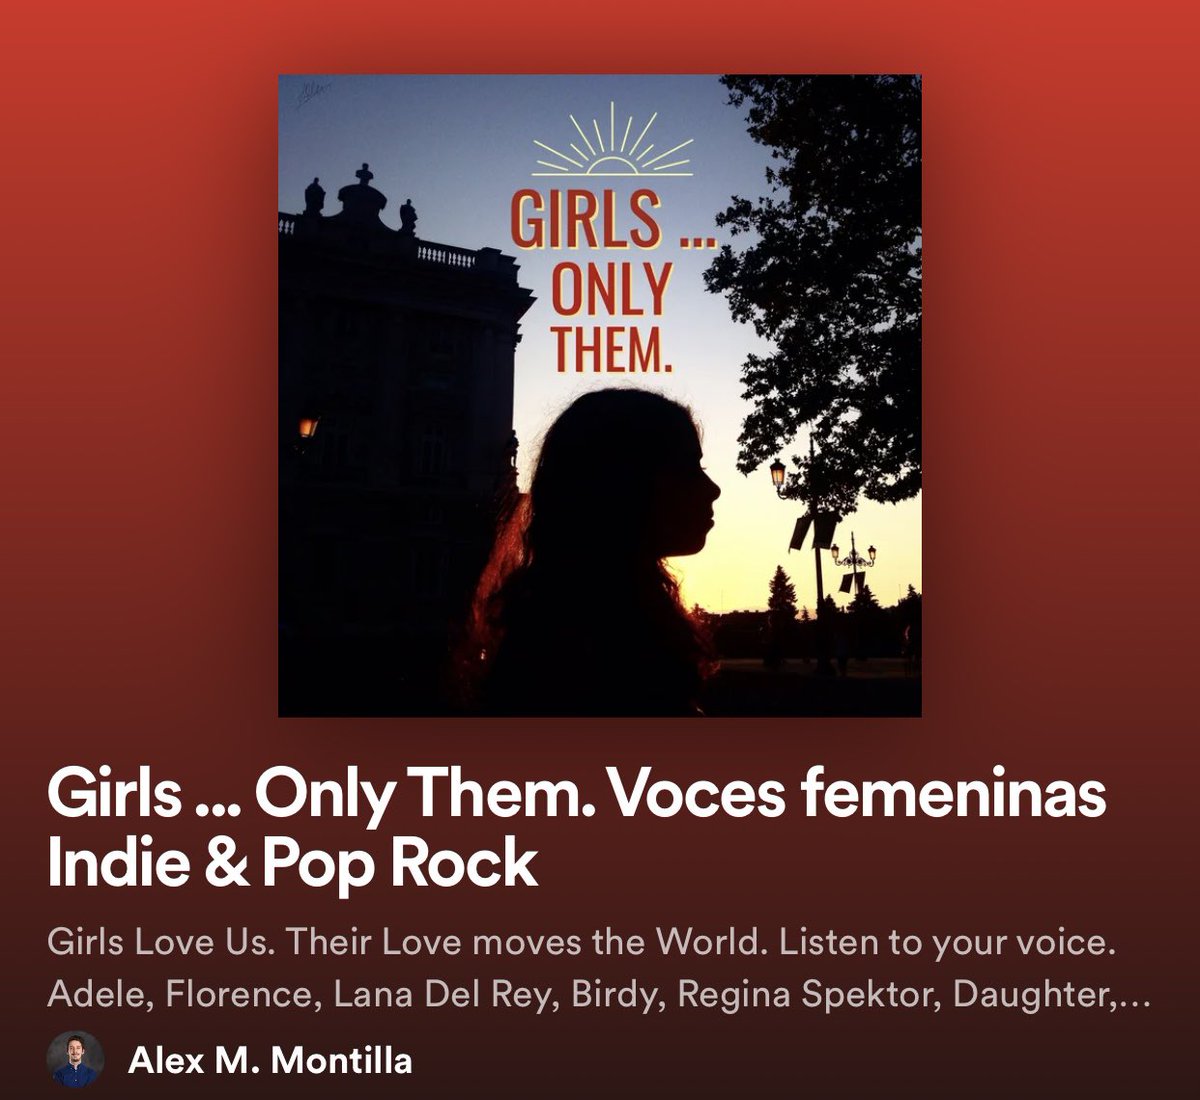 Thanks @alexmonti90 for adding ‘Fault Lines’ to this playlist of badass women artists 🌞 #spotifyplaylist